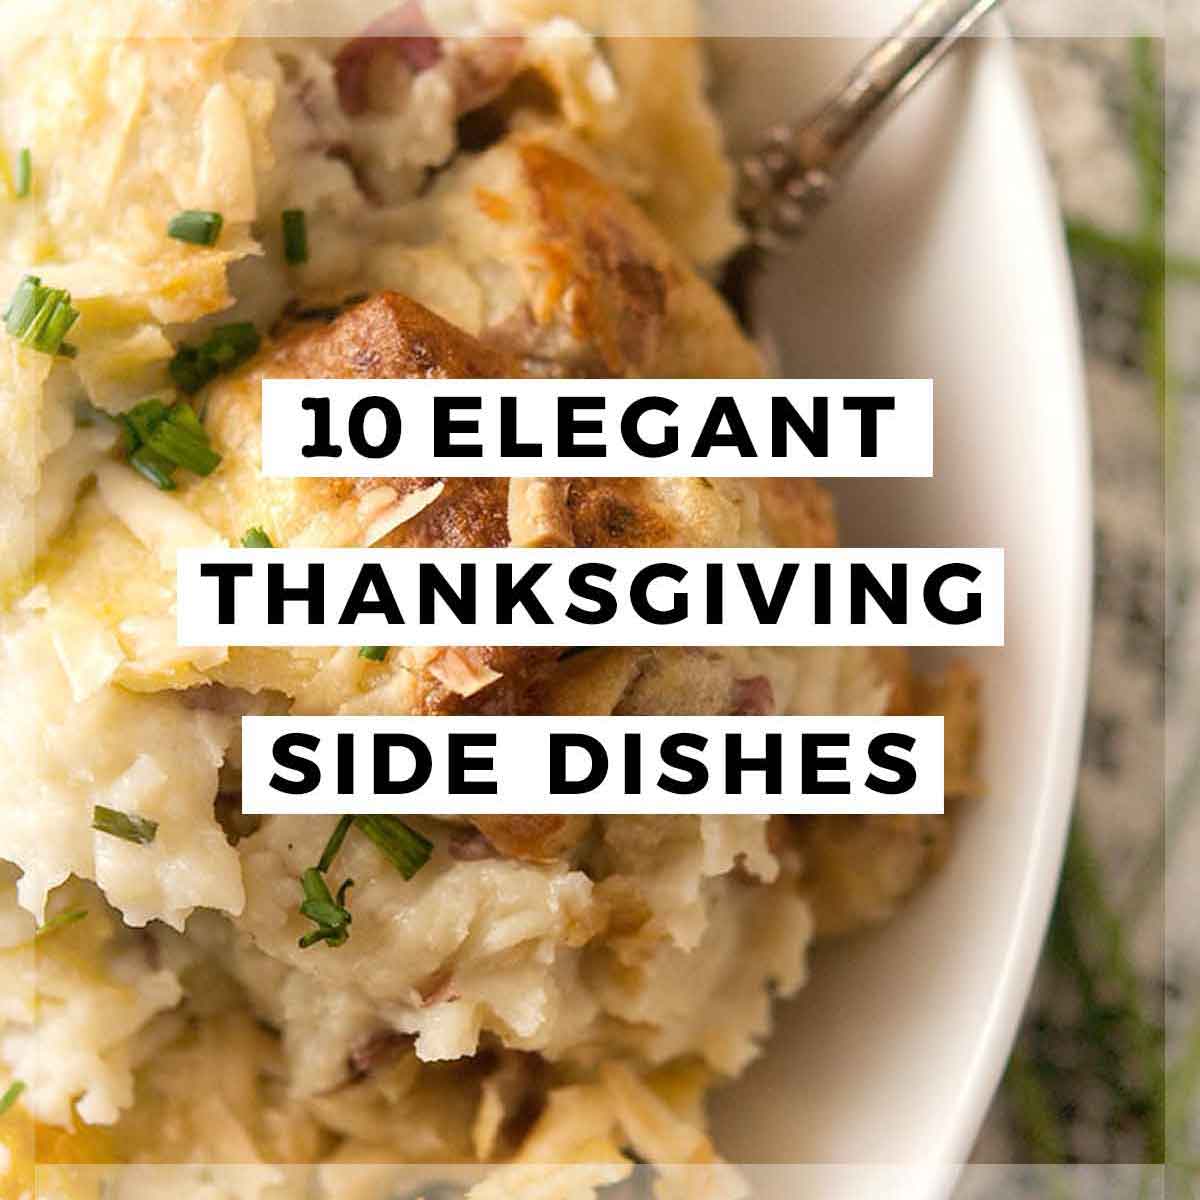 An image of mashed potatoes in a bowl with a title that says "10 Elegant Thanksgiving Side Dishes.”